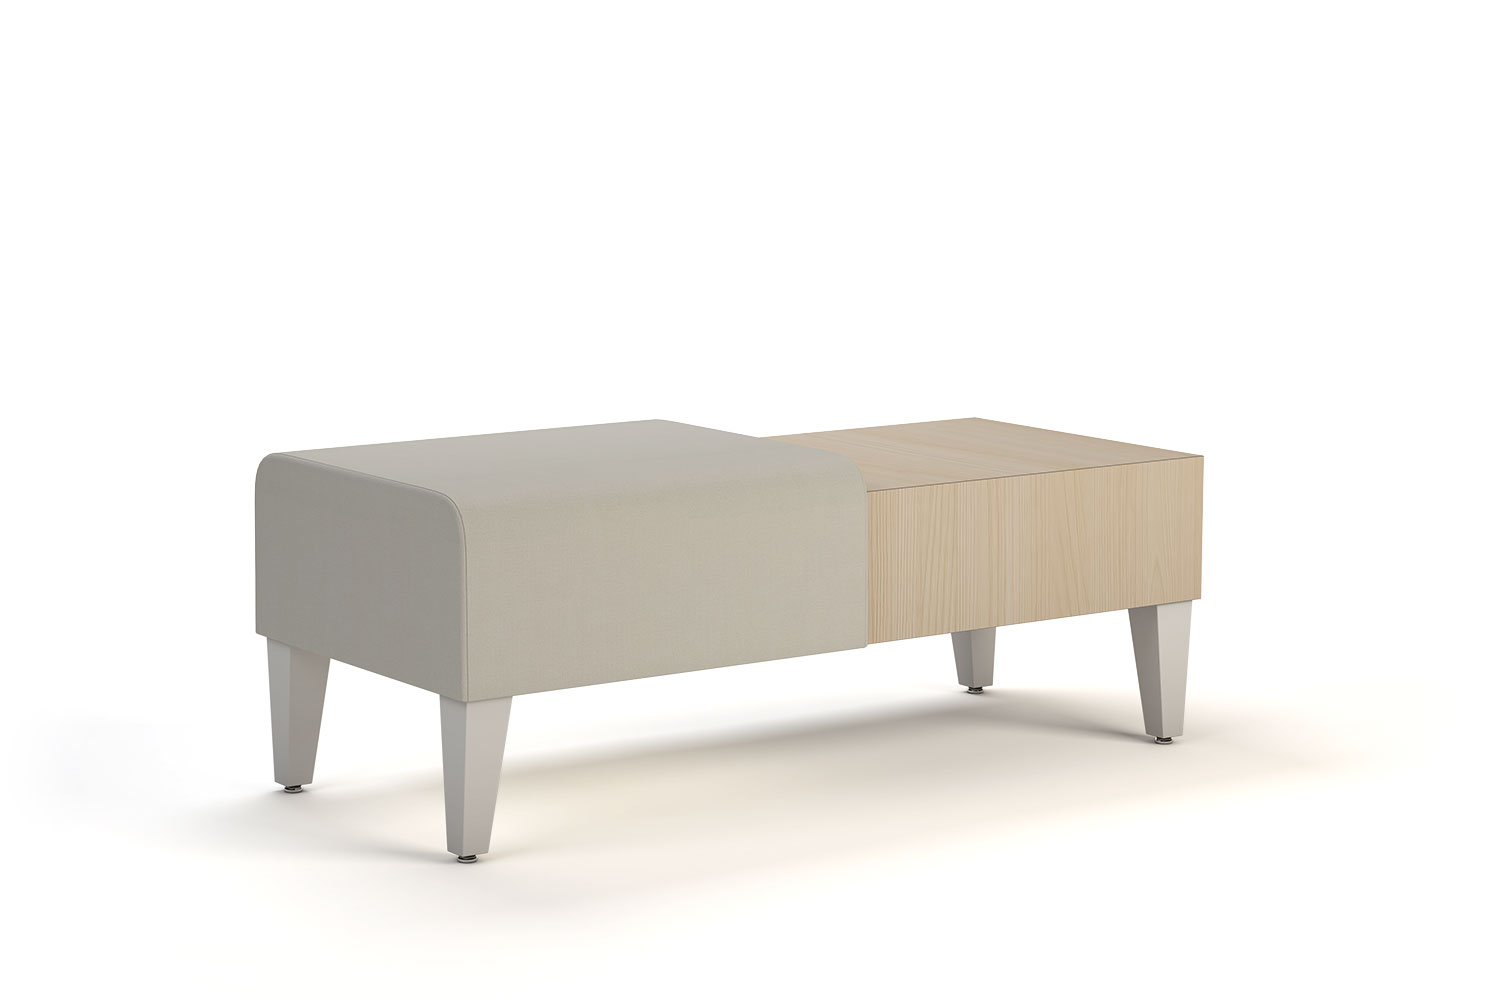 Malibu Bench 2 Unit with Online Table